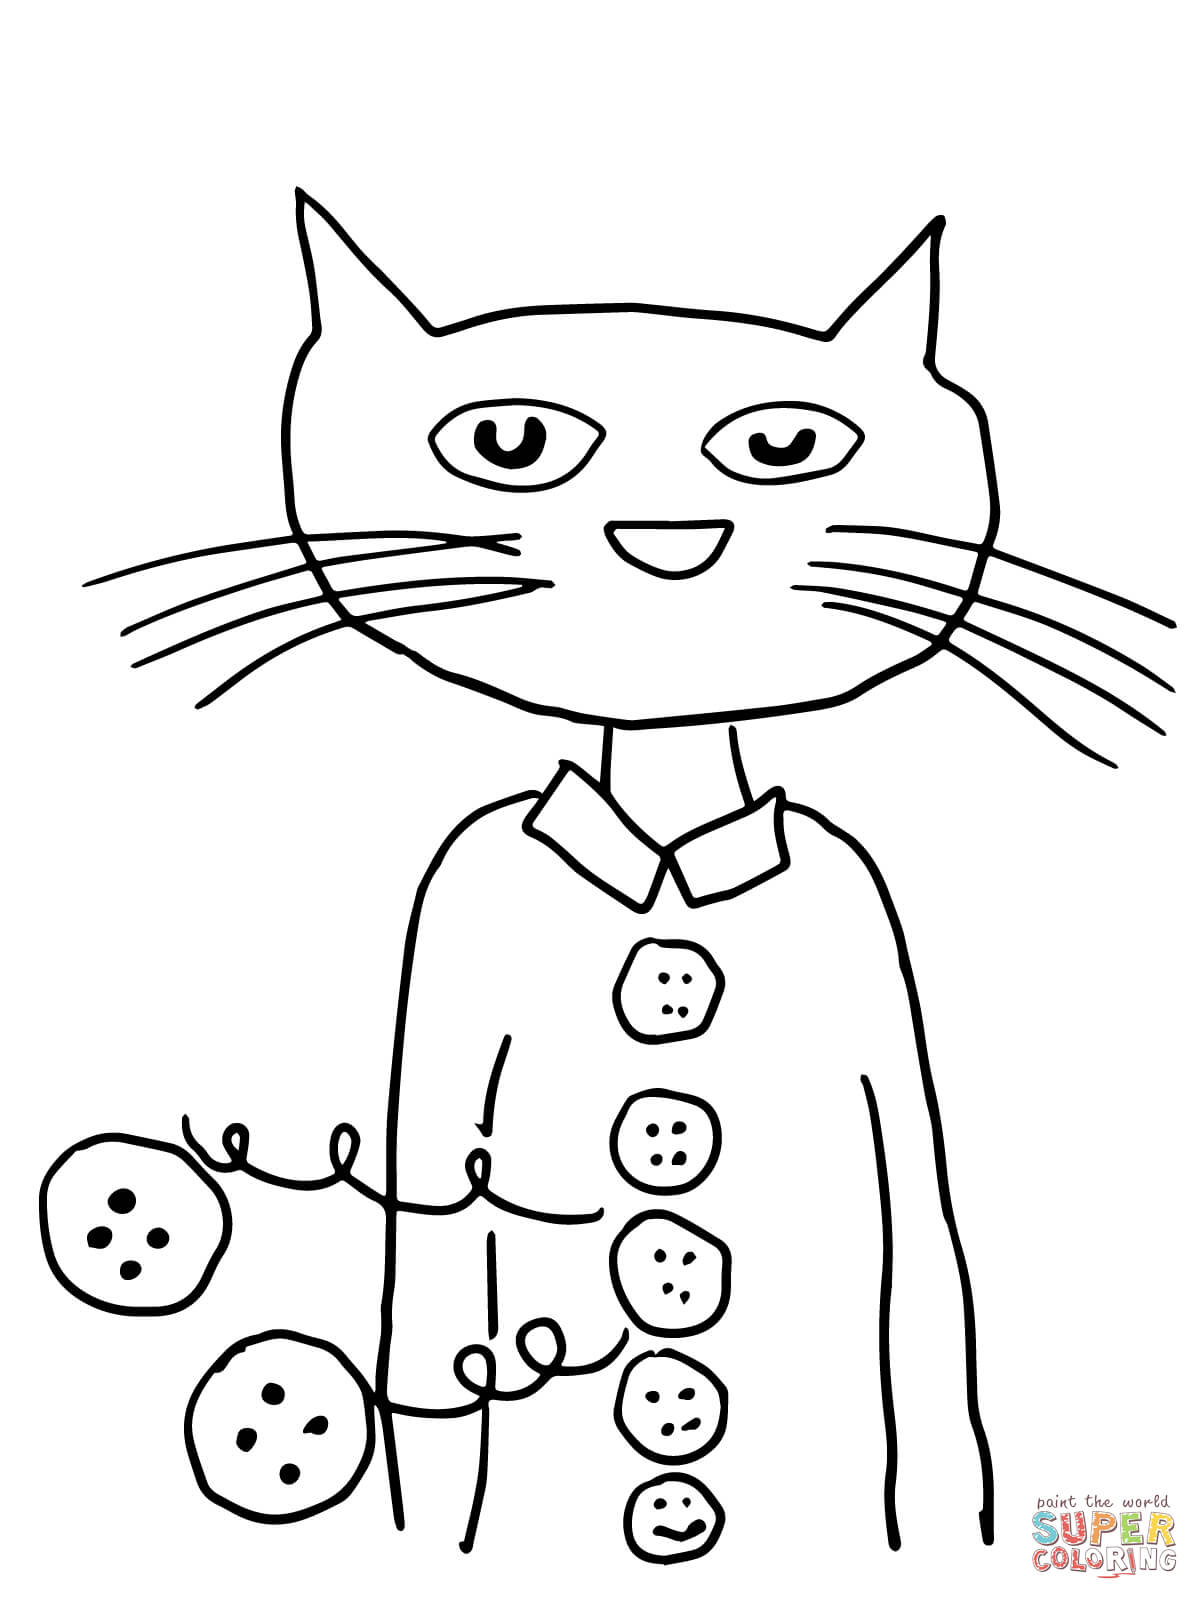 Pete the cat groovy buttons coloring page free printable coloring pages